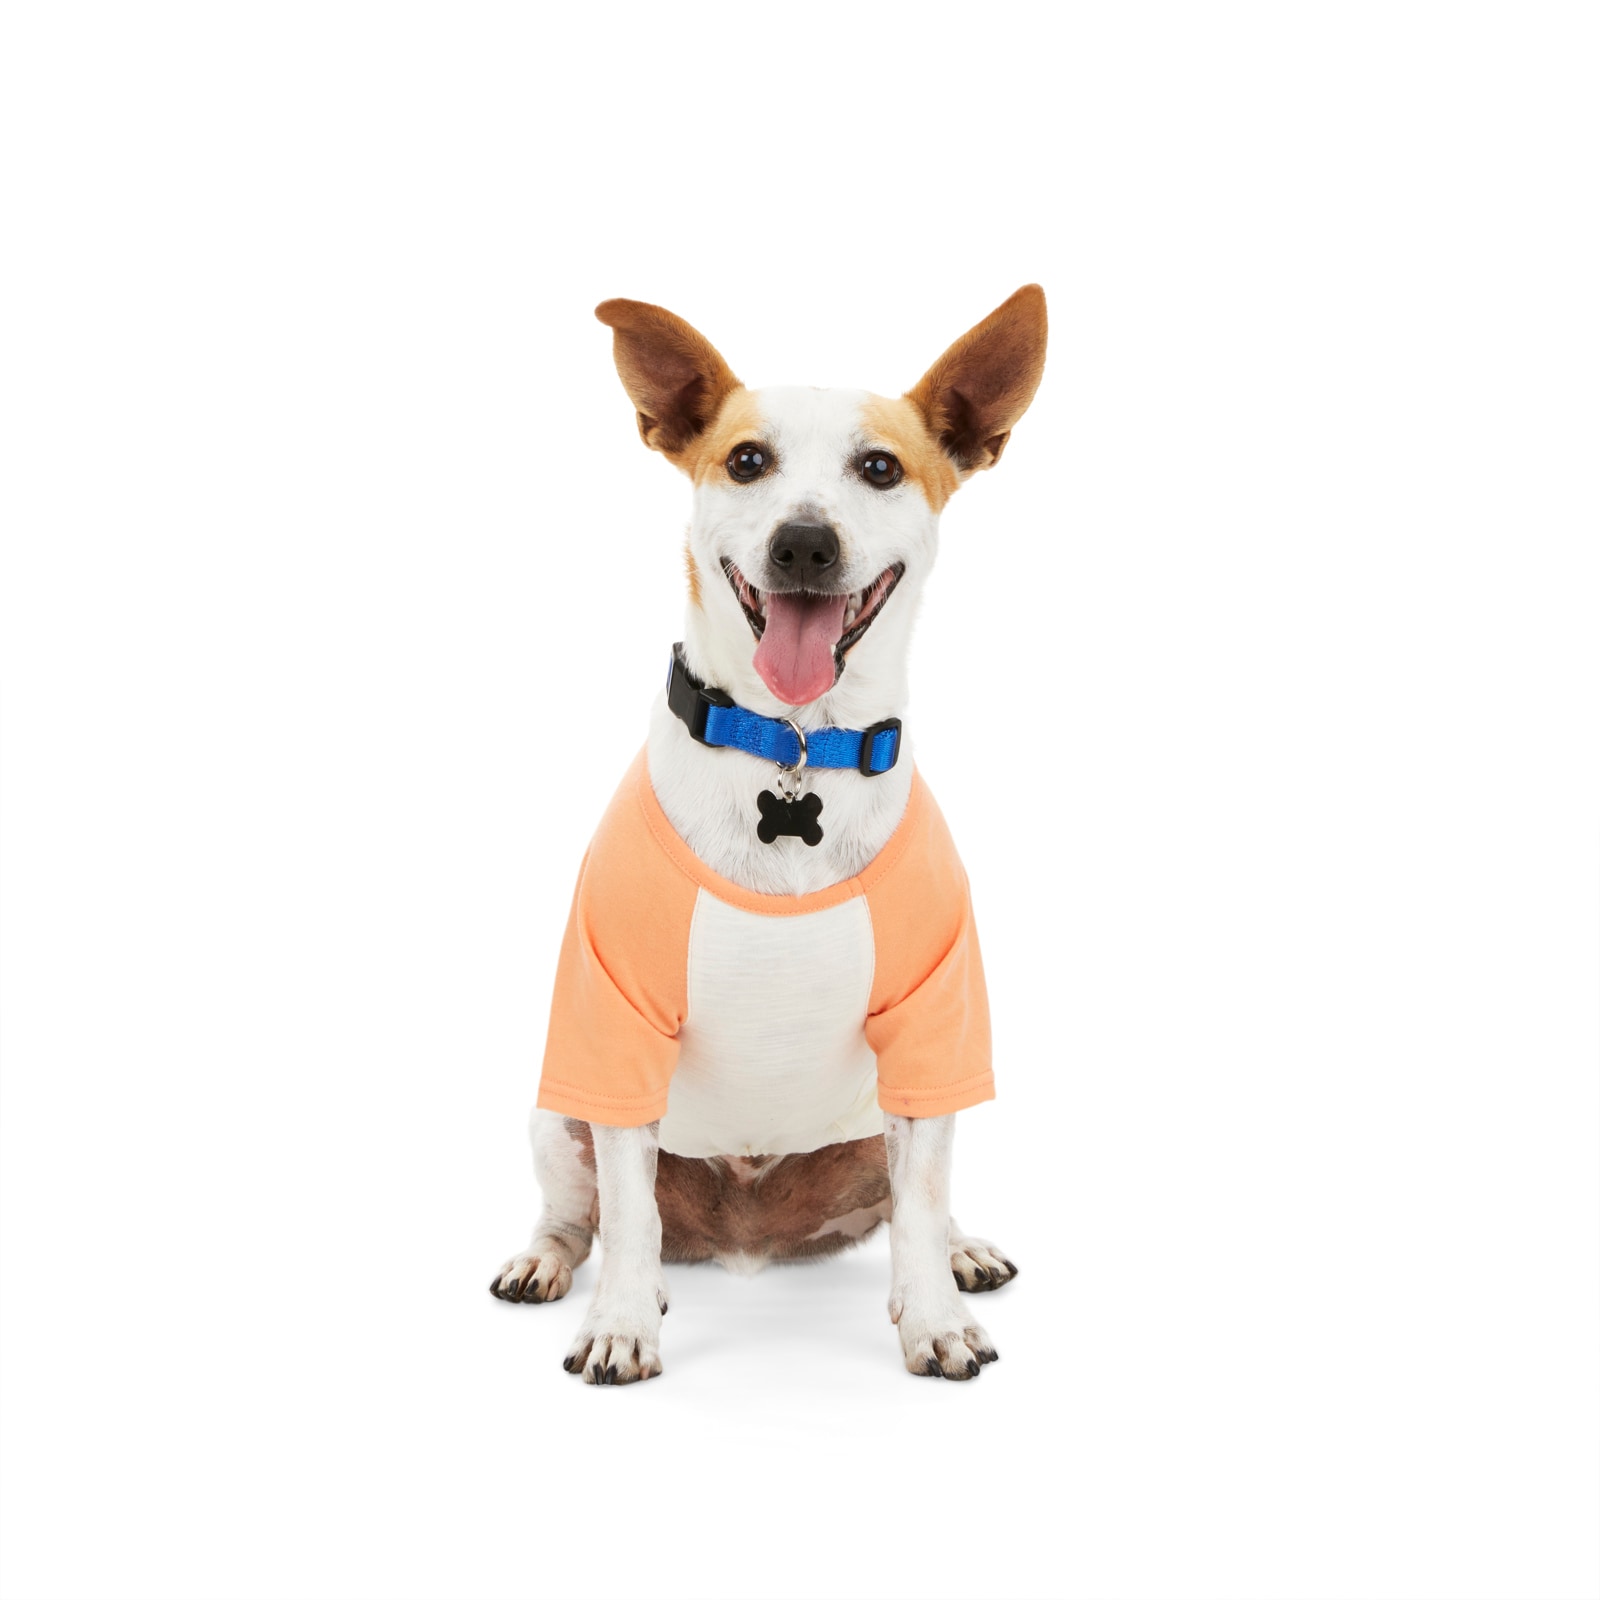 Youly Orange Dog Shirt X-large (91- 110 in the Pet Clothing at Lowes.com